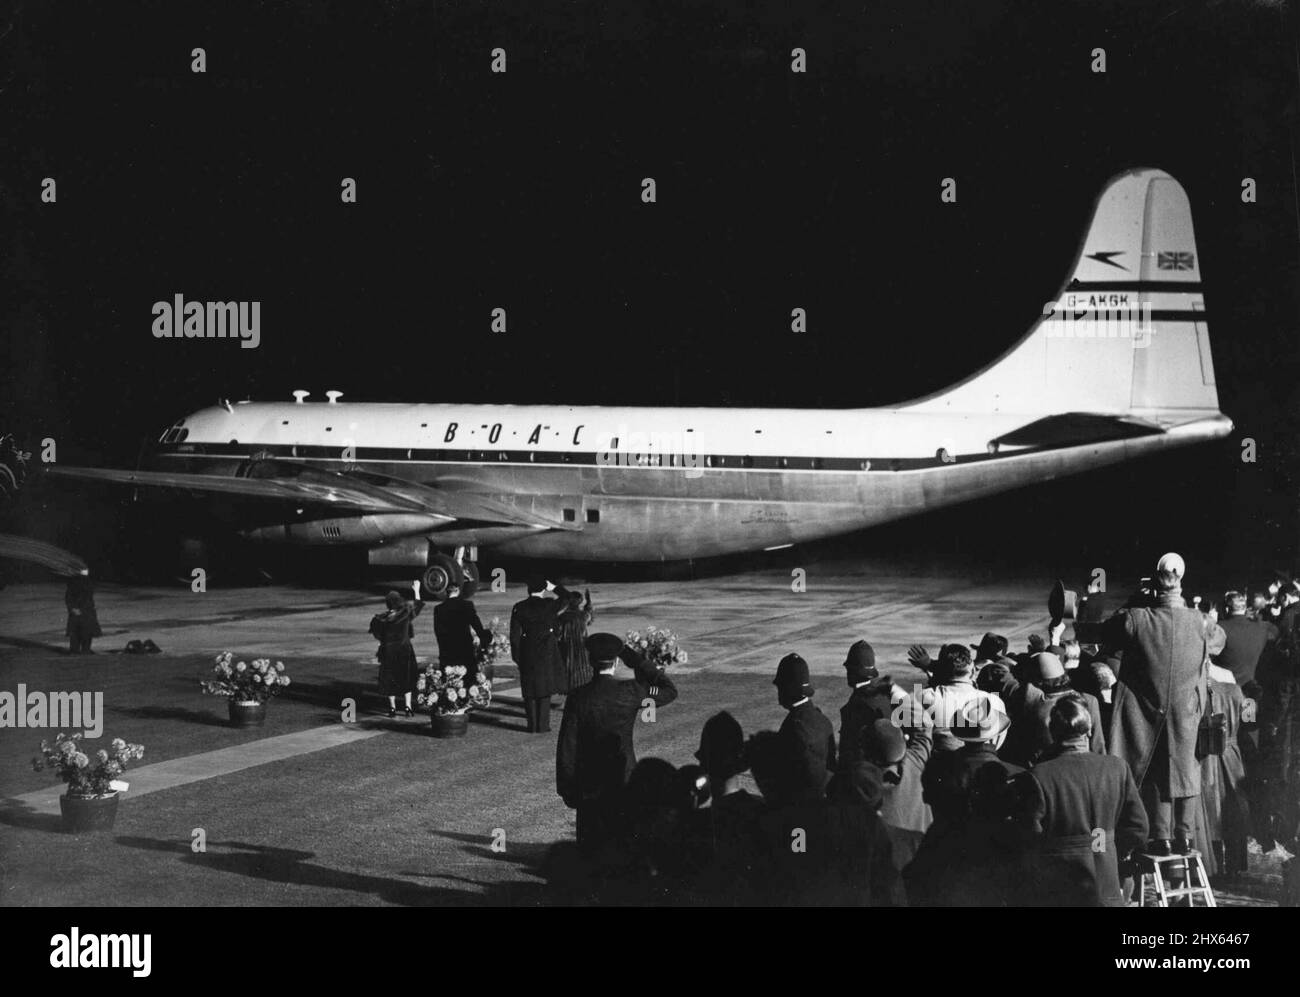 Last night the Queen and the Duke of Edinburgh left London Airport on the first stage of their historic, six-months tour of the Commonwealth. The Queen Mother and Princess Margaret wave goodbye as the B.O.A.C. Stratocruiser Canopus leaves London Airport taking the Queen and the Duke of Edinburgh to Bermuda. November 24, 1953. (Photo by Daily Mirror). Stock Photo